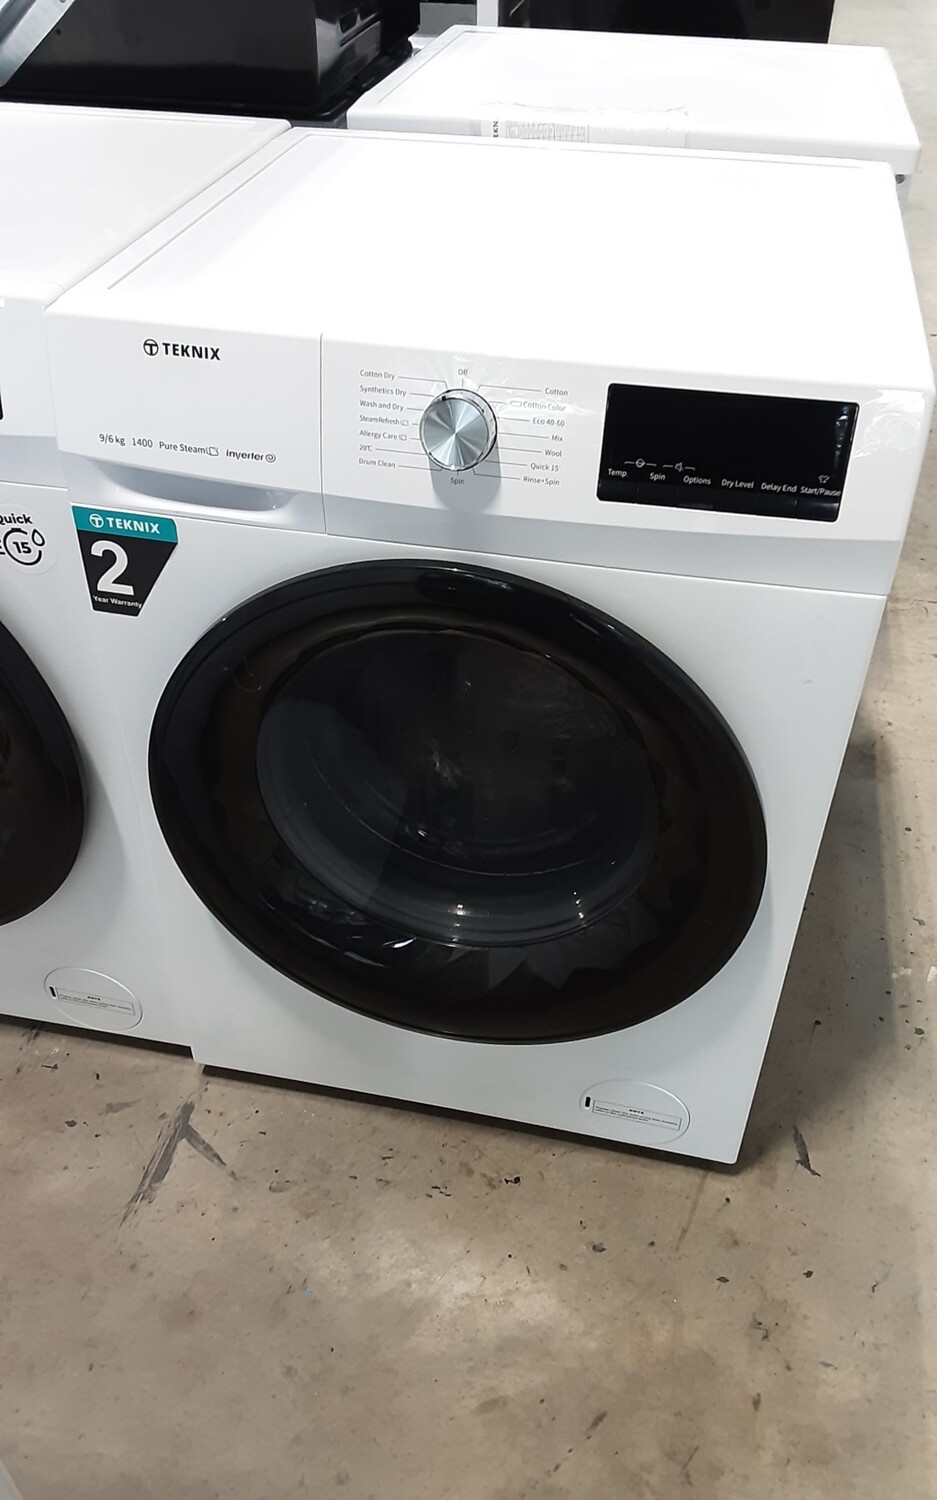 Teknix TKWD9614HW Washer Dryer 9Kg + 6Kg 1400 Spin New Graded +12 Months Guarantee H85 W60 D62. This item is located at our Whitby Road Shop